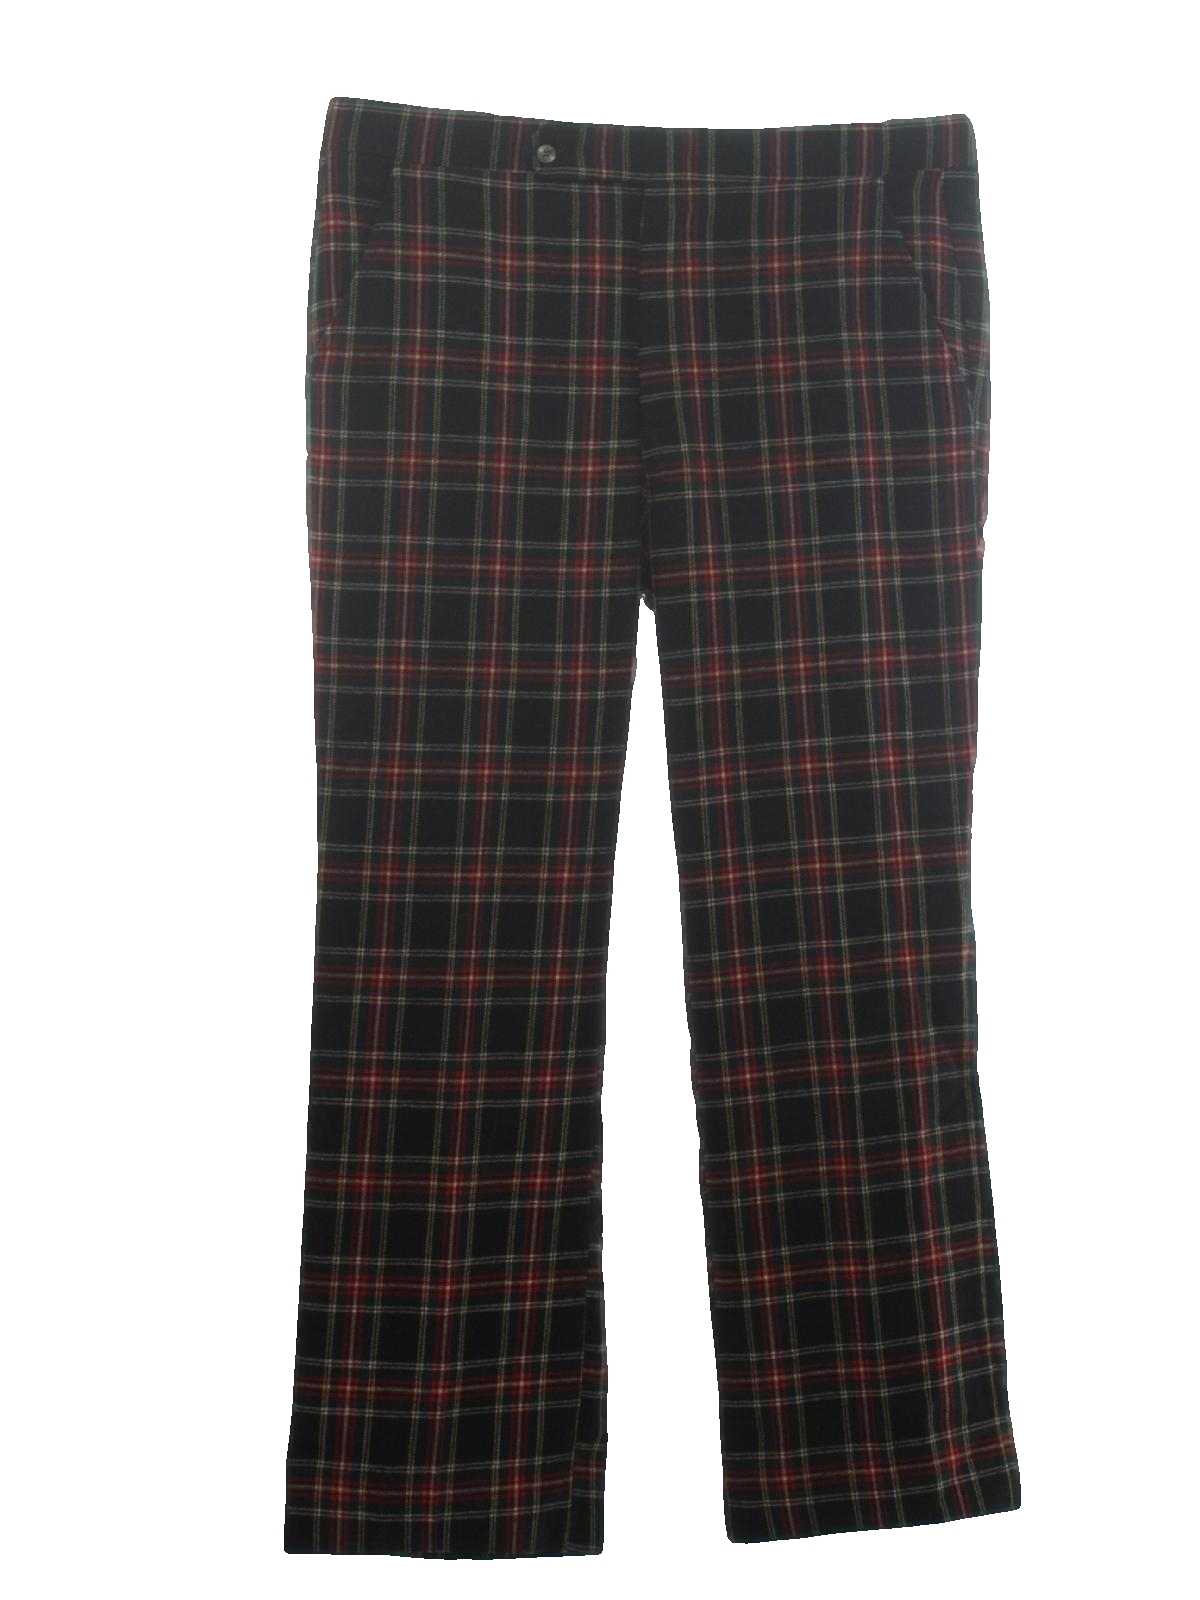 red black and white plaid pants